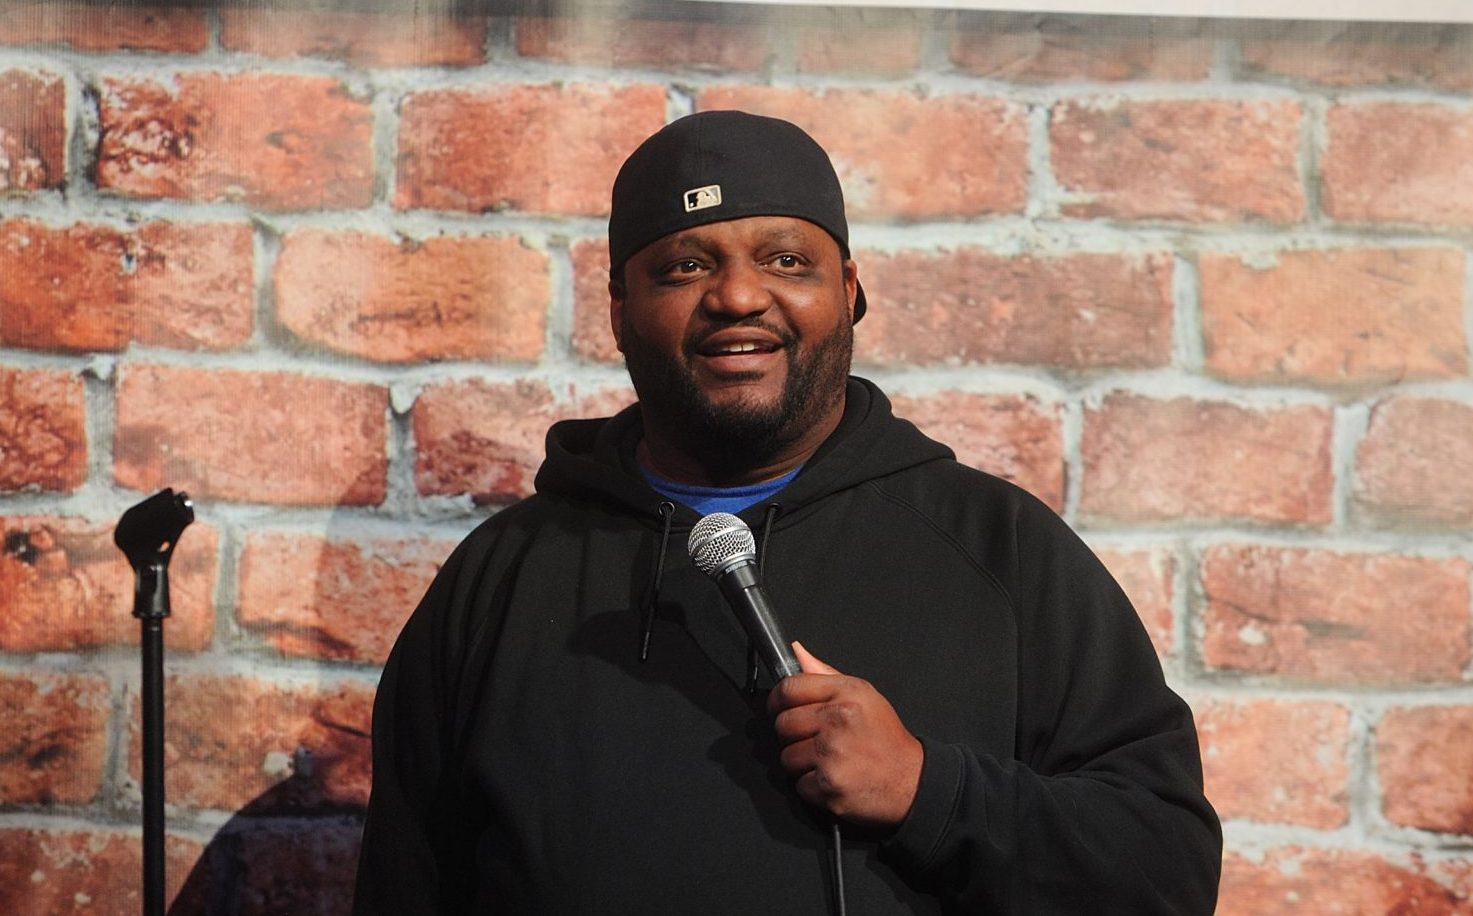 Aries Spears Speaks Out In Wake Of Recent Sexual Child Abuse Accusations: “I’m Not Running From Anything & I’m Not Guilty Of Anything” 